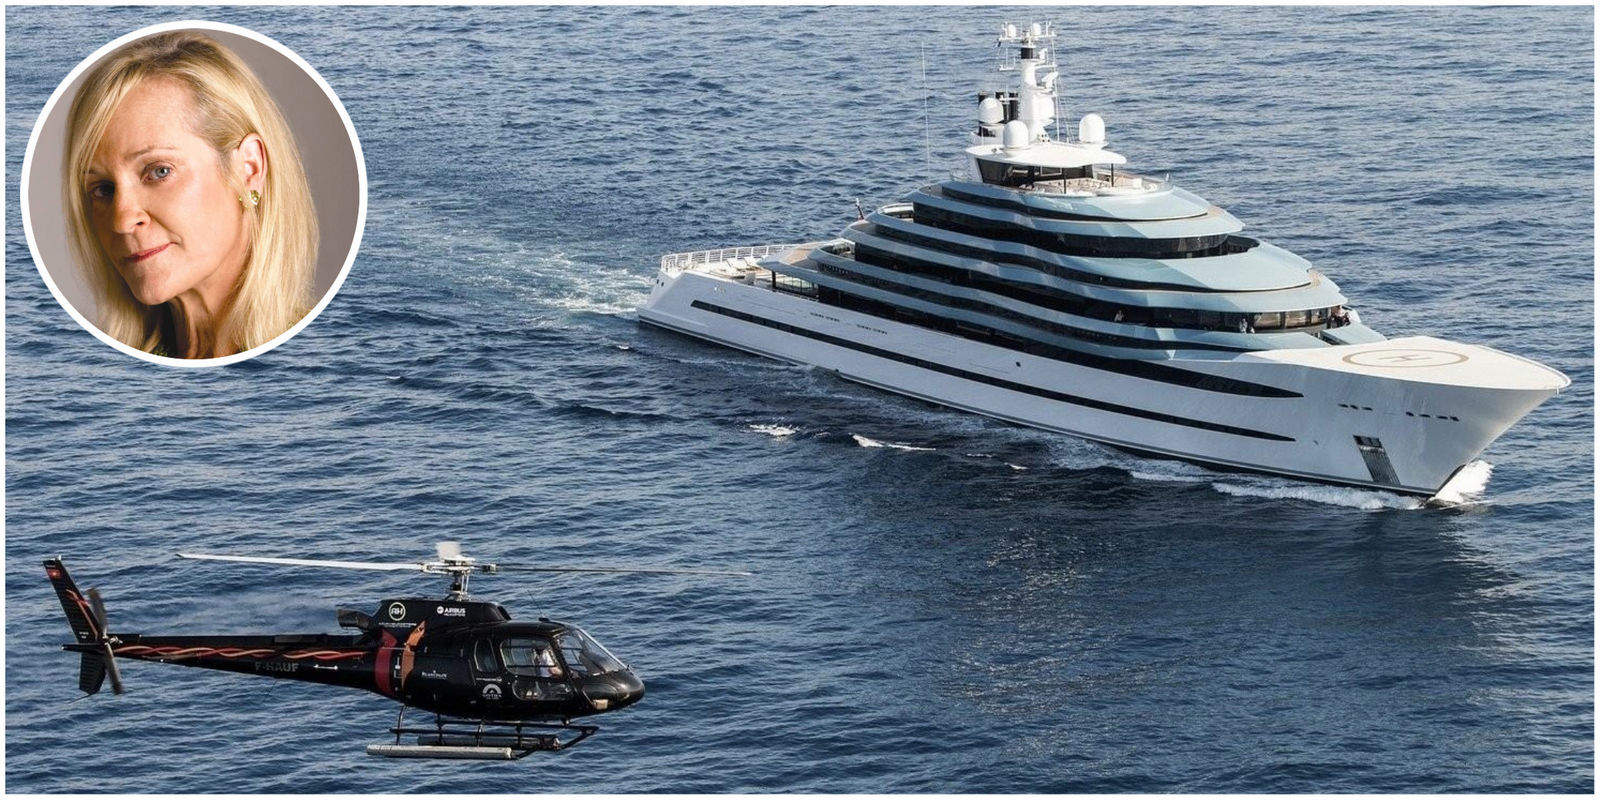 Serial yacht owners: 3 billionaires transforming yachting - Yacht